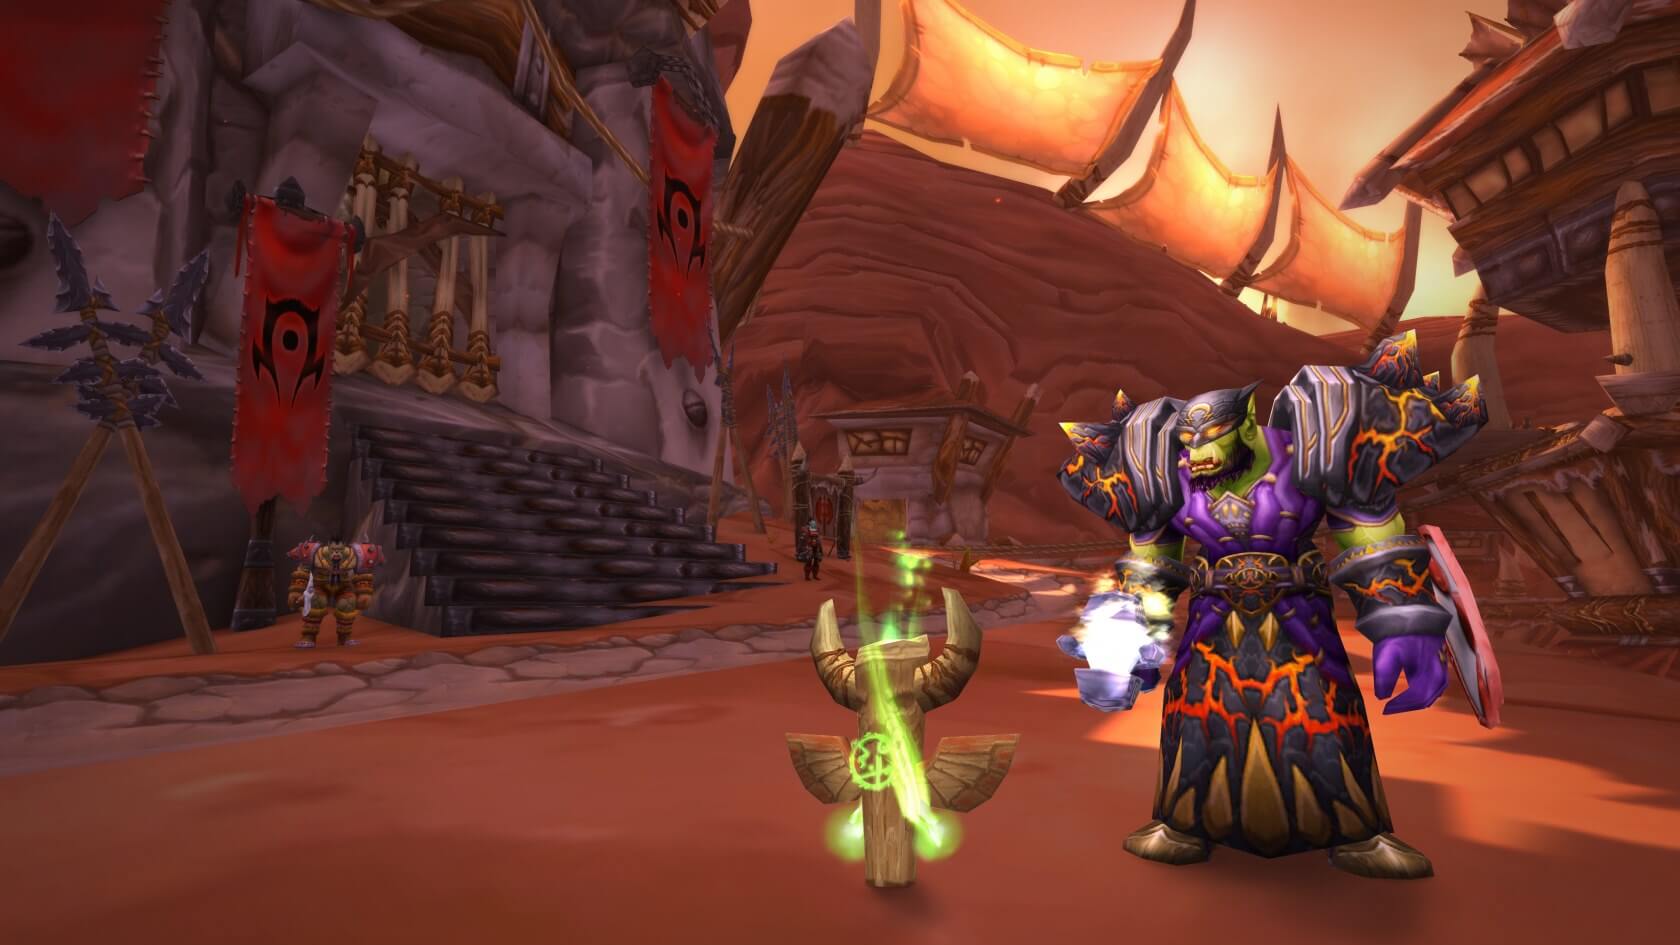 World of Warcraft Classic is one of the most popular games on Twitch